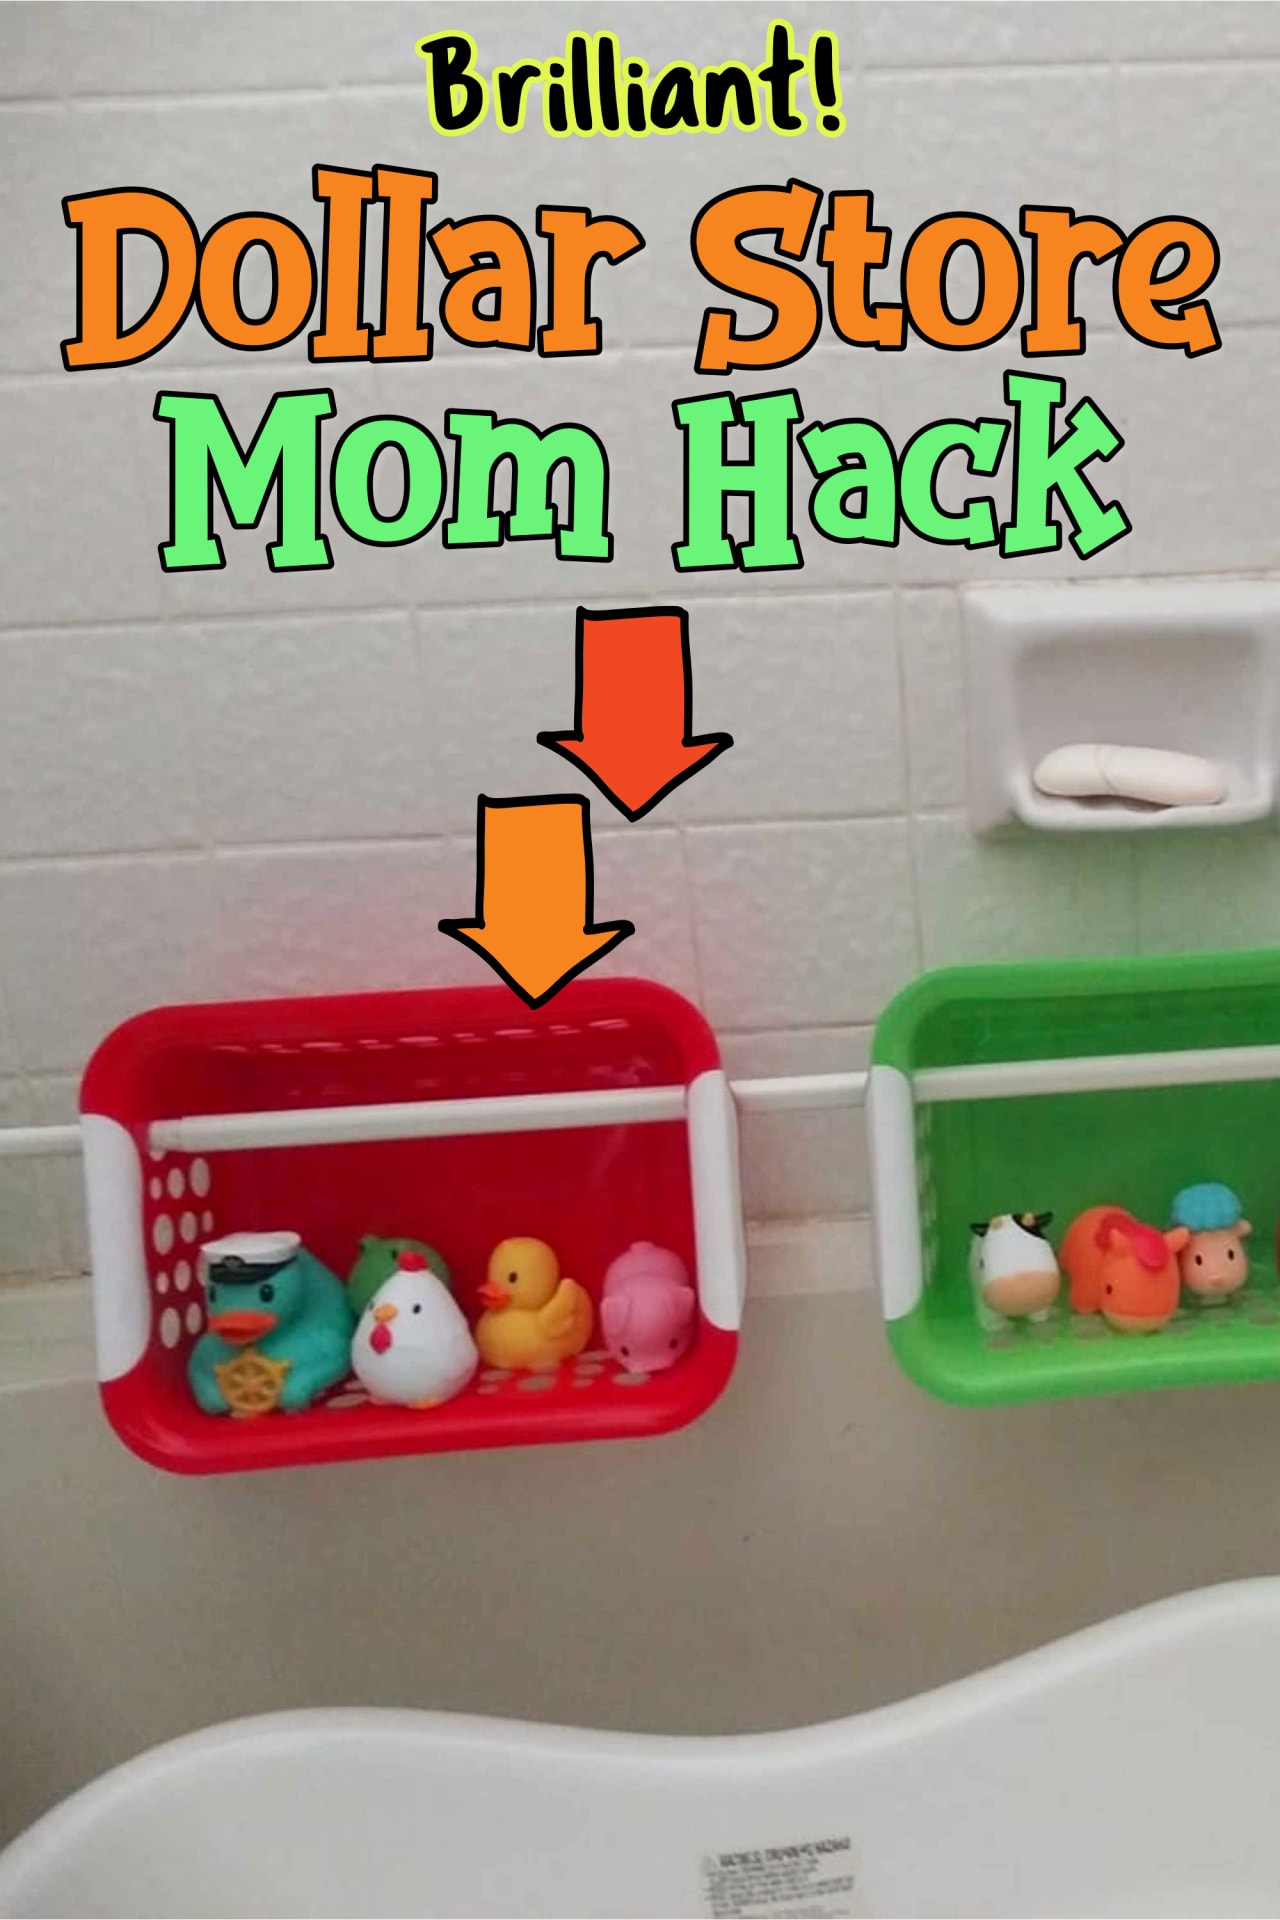 Dollar Store bath toy organization hack for organizing toys in the bathtub - what a cheap and easy way to get organized on a budget!